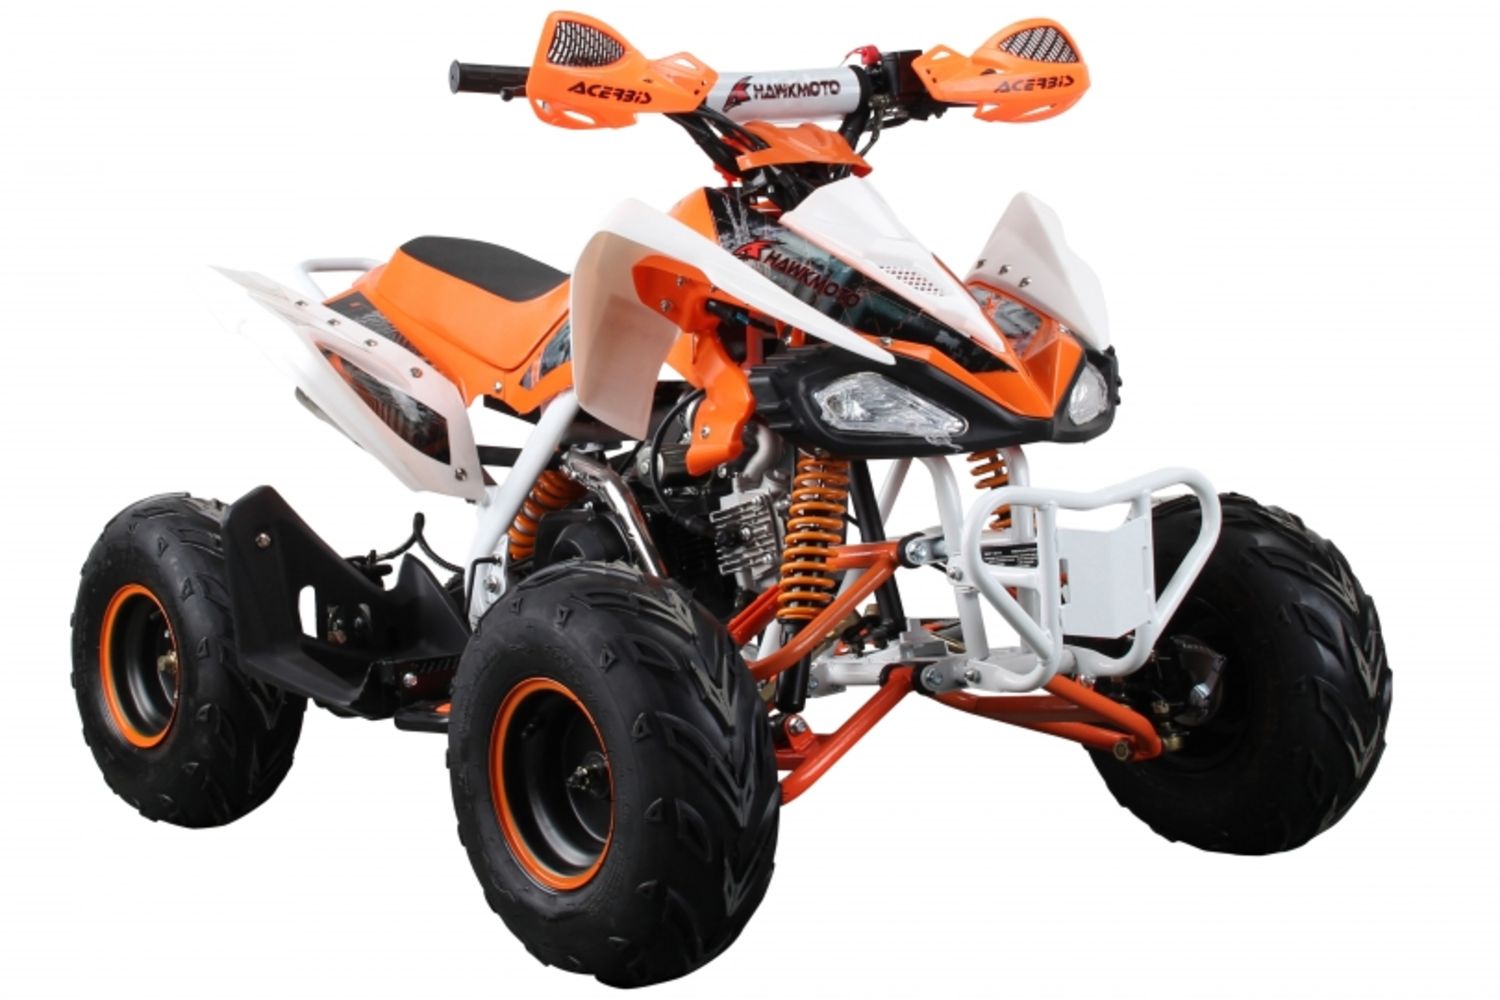 Brand New Petrol Quad Bikes & Dirt Bikes - Ideal For Christmas - All Brand New & Boxed Ready To Go!